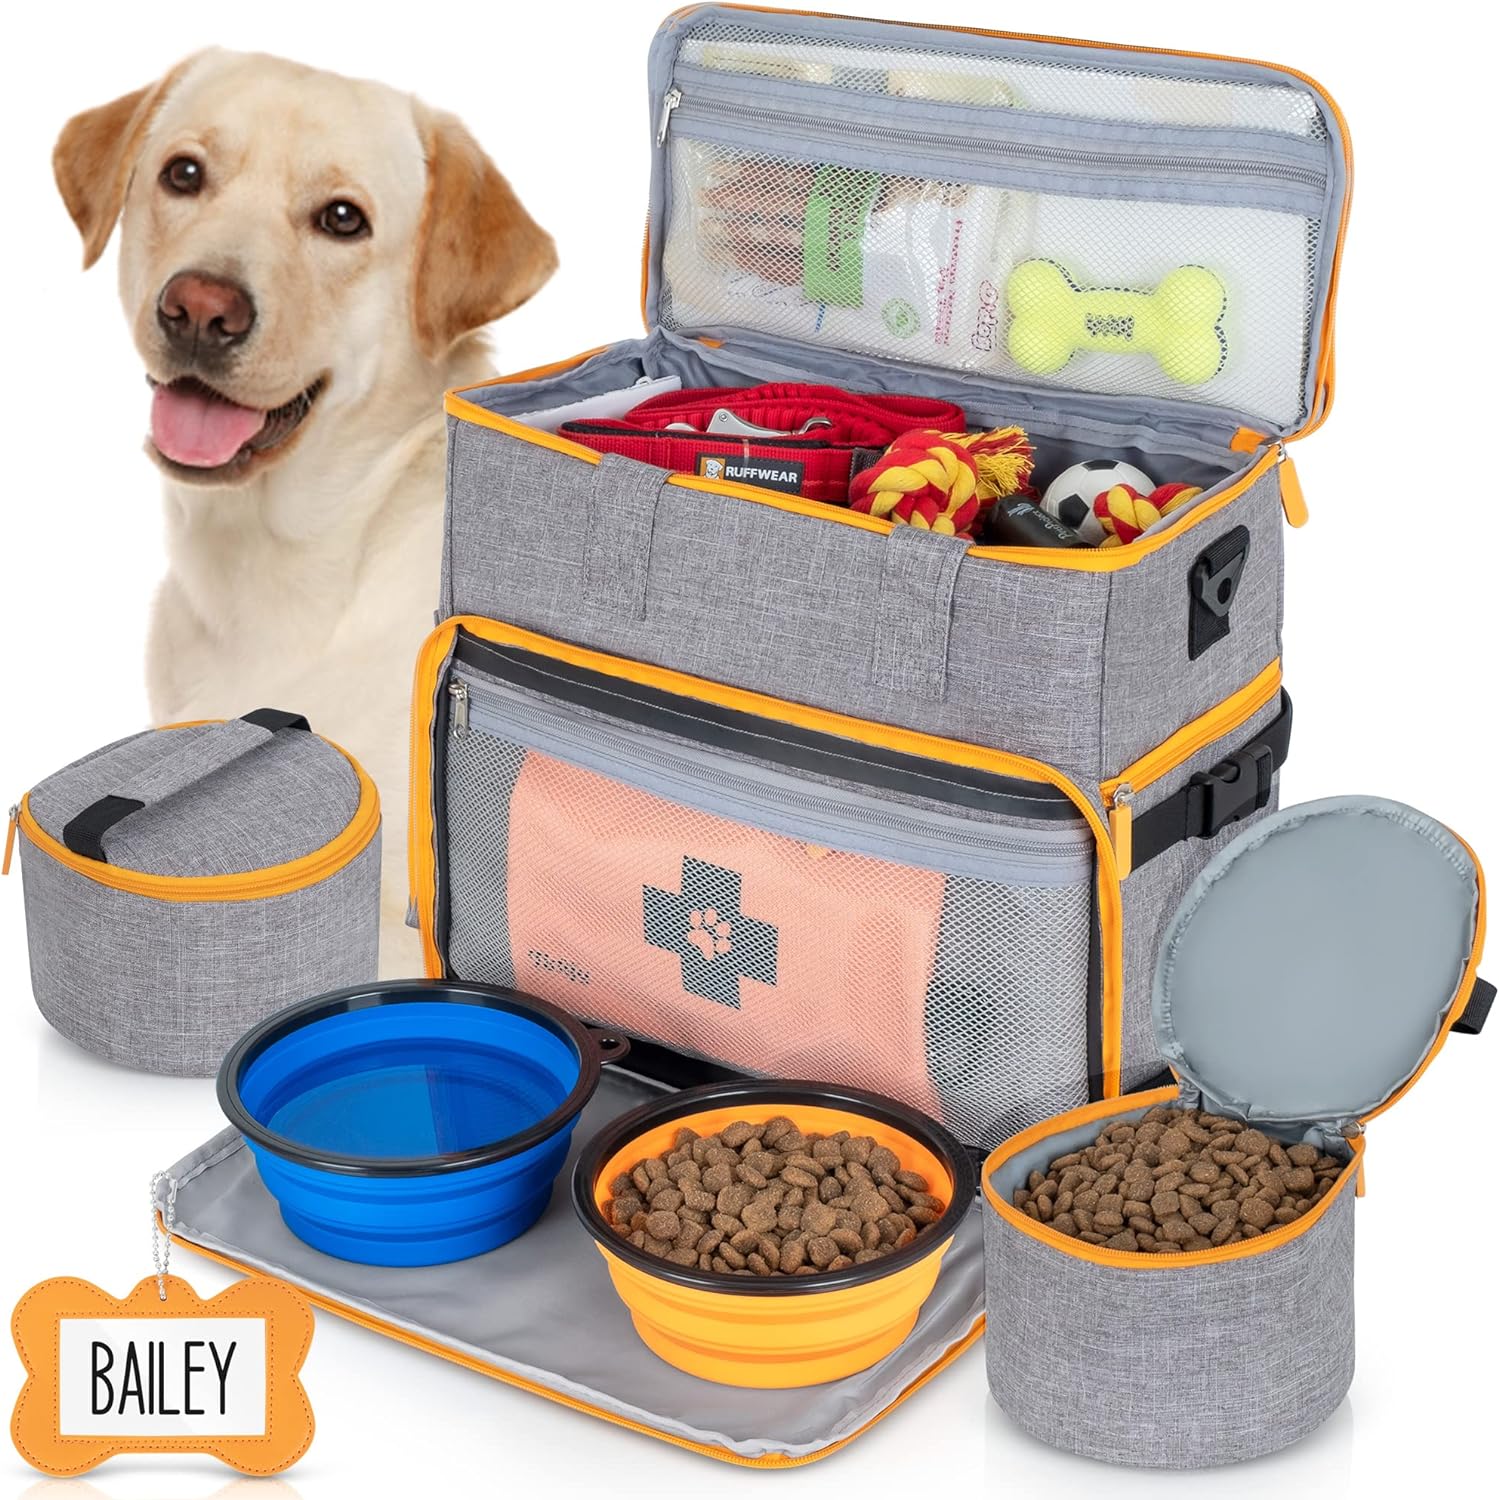 Dog Travel Bag Airline Approved Travel Set for Dog and Cat Tote Organizer with Multi Function Pockets, 2 Food Containers and Collapsible Bowls, Weekend Away Dog Bag for Travel Accessories – Gray